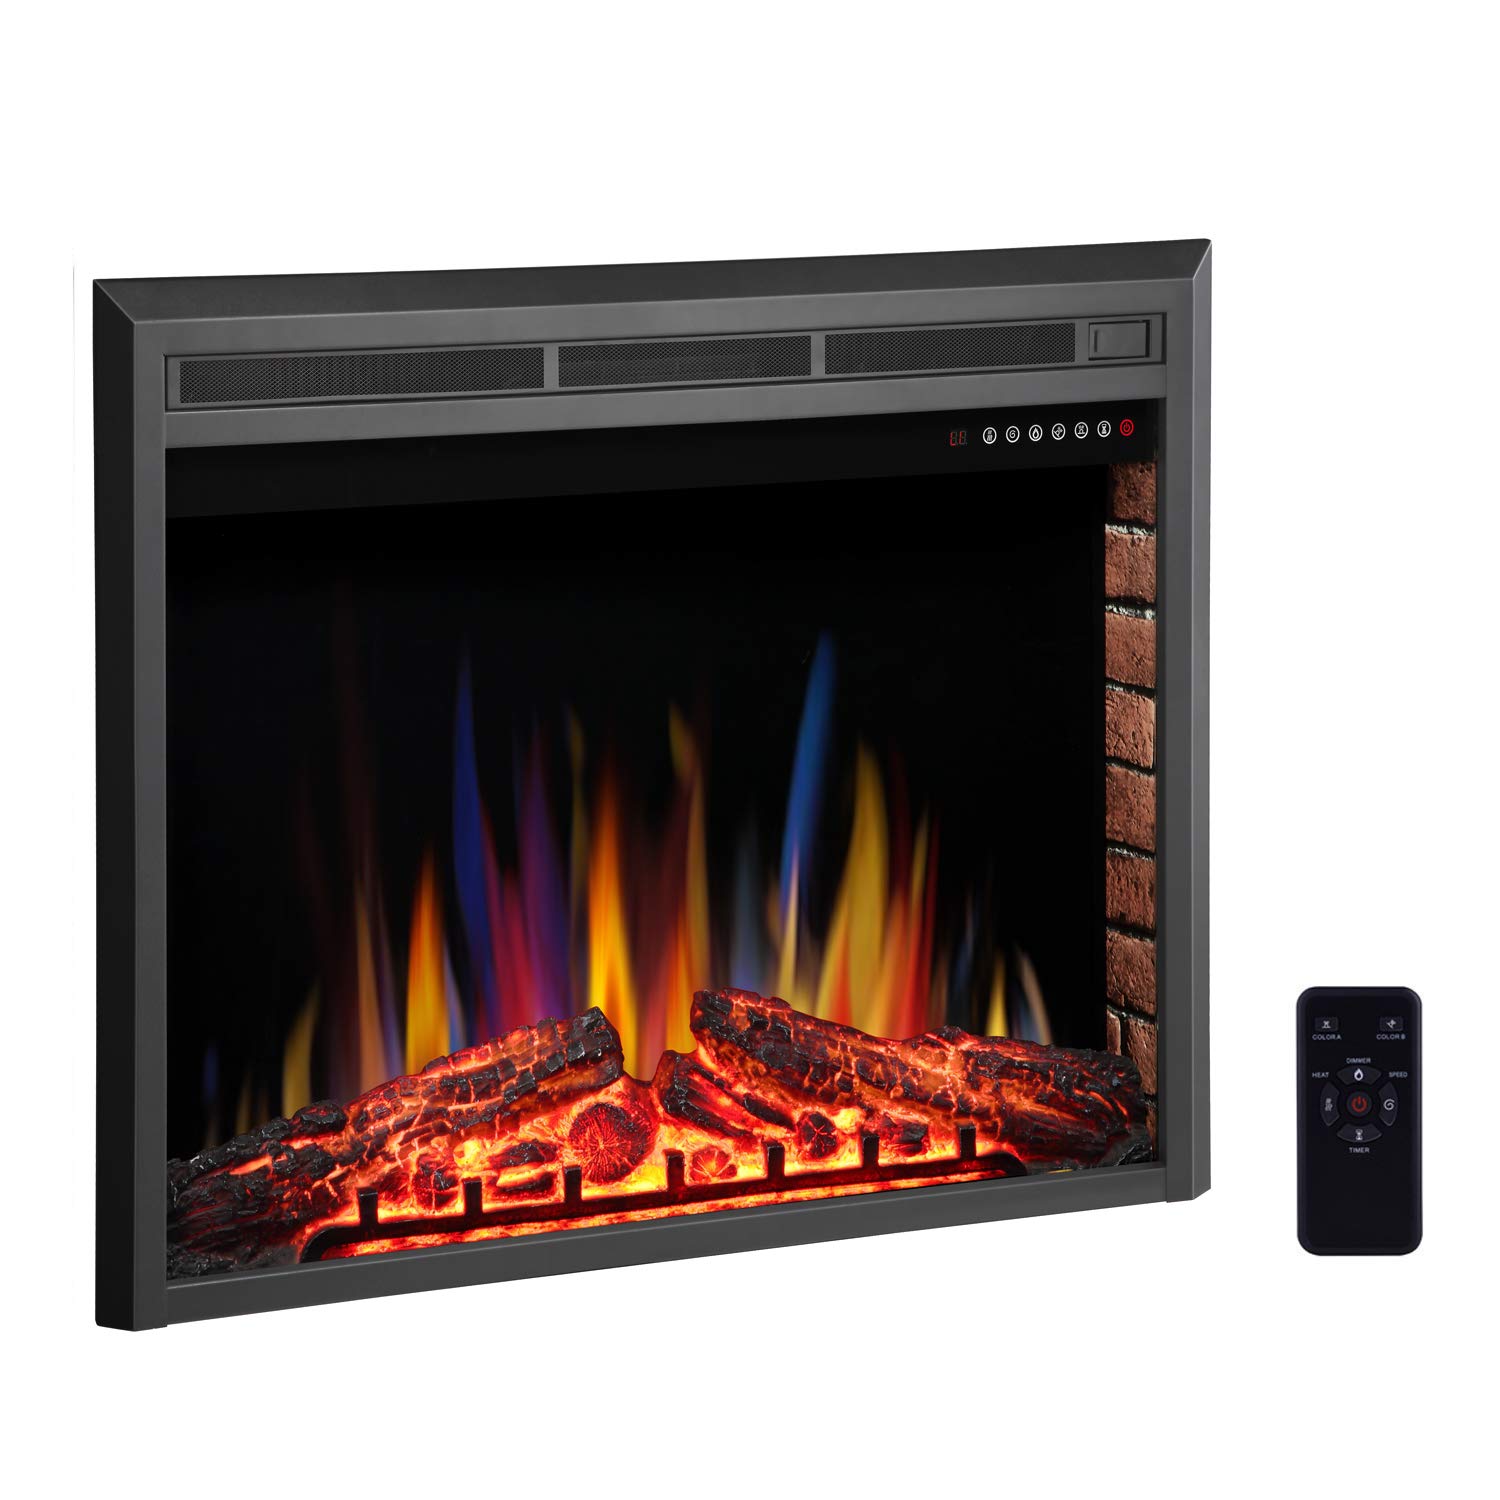 23 Electric Fireplace Insert Luxury Rwflame 28" Electric Fireplace Insert Freestanding & Recessed Electric Stove Heater touch Screen Remote Control 750w 1500w with Timer & Colorful Flame